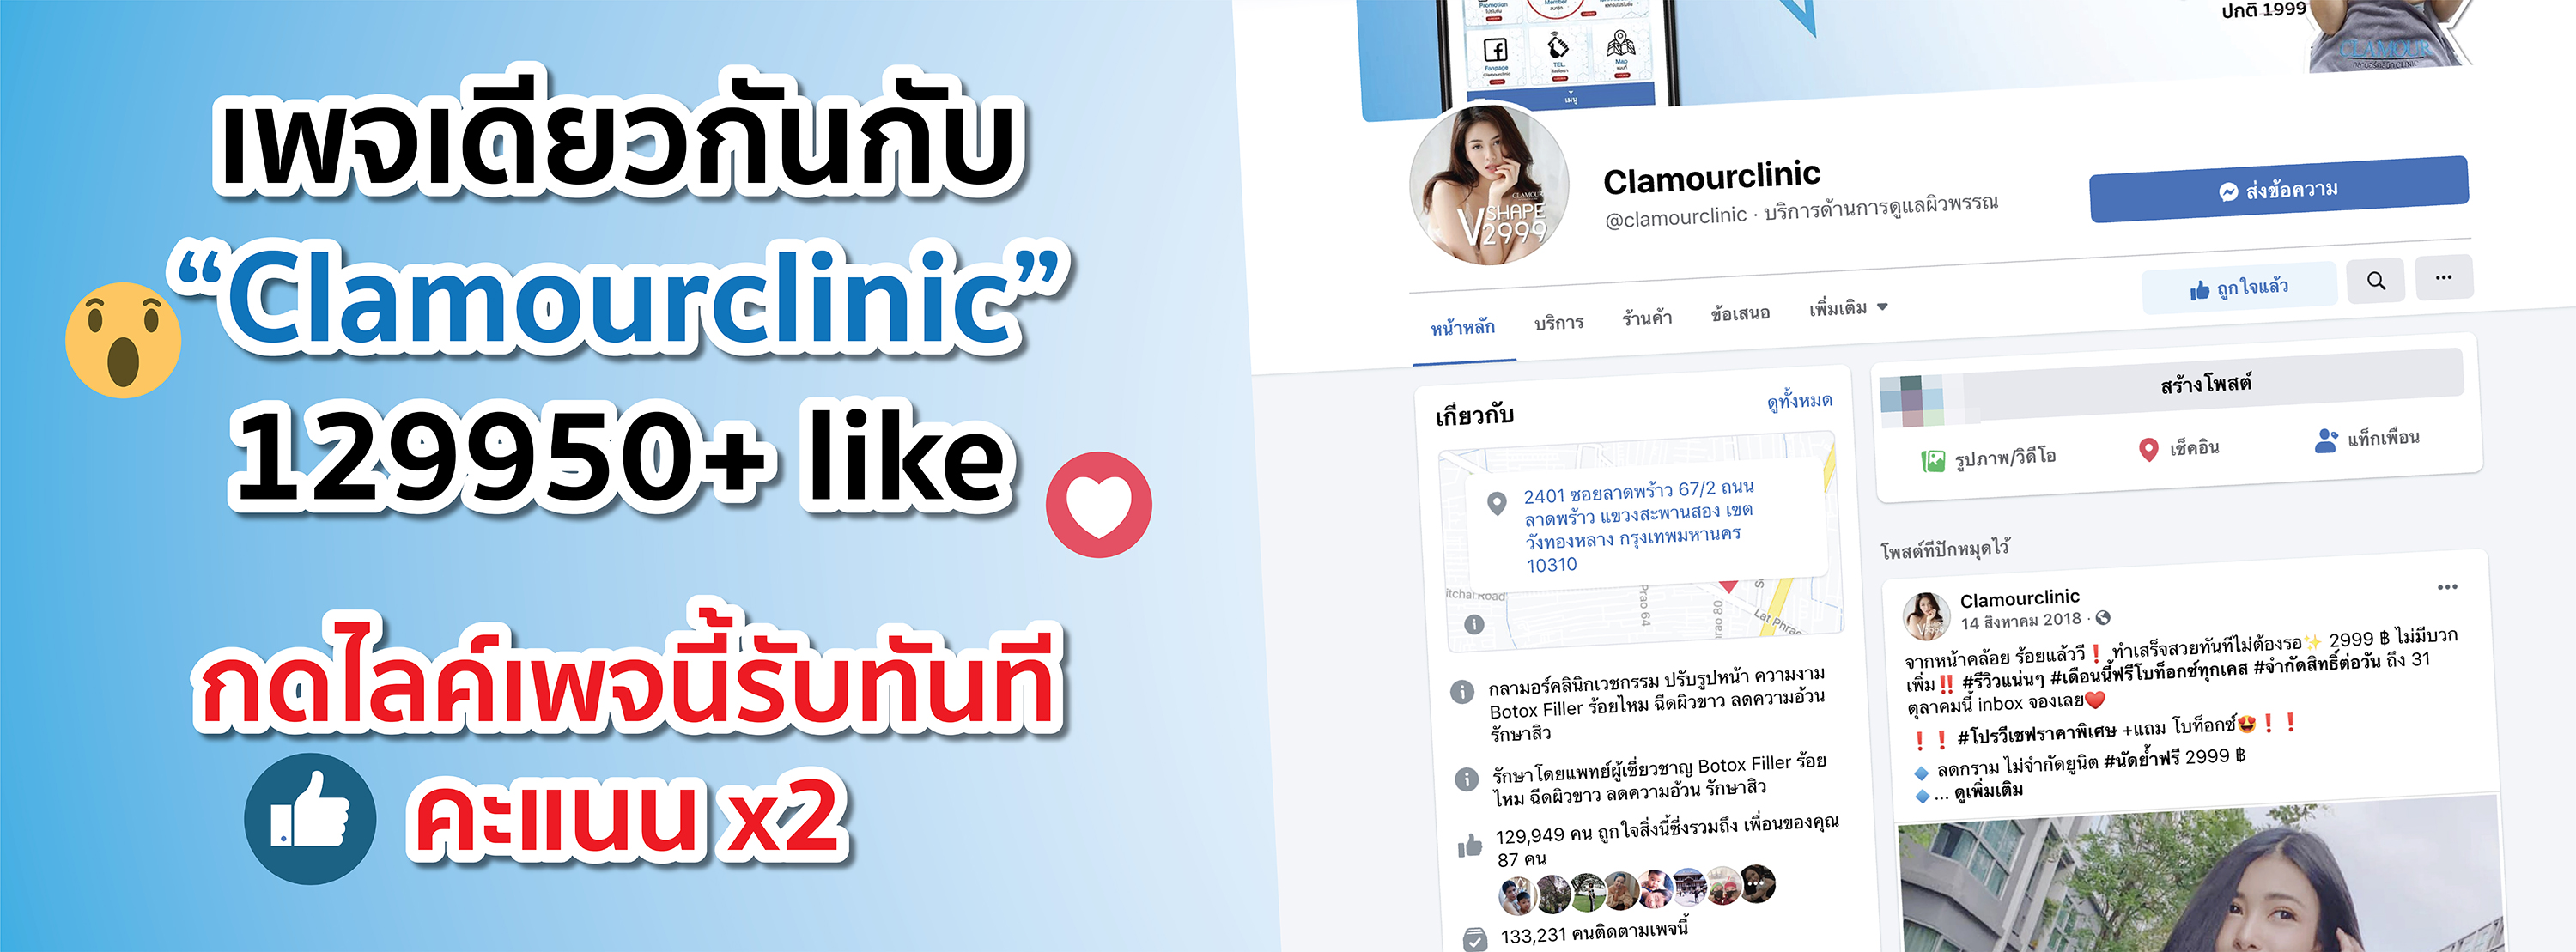 page clamourclinic thailand